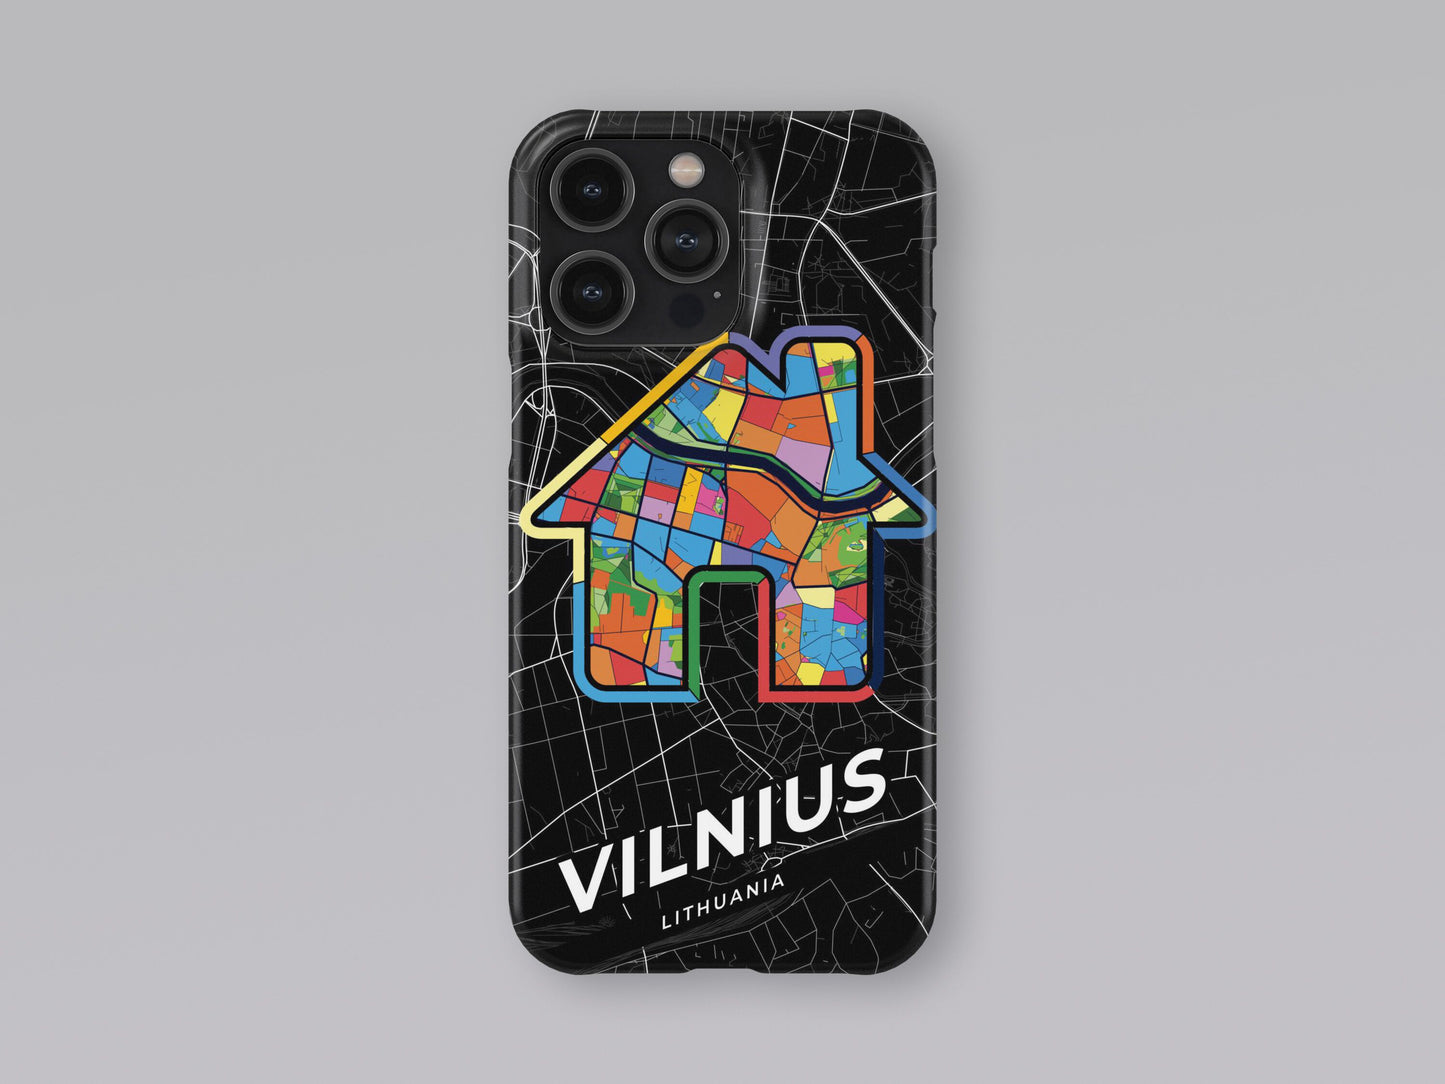 Vilnius Lithuania slim phone case with colorful icon 3